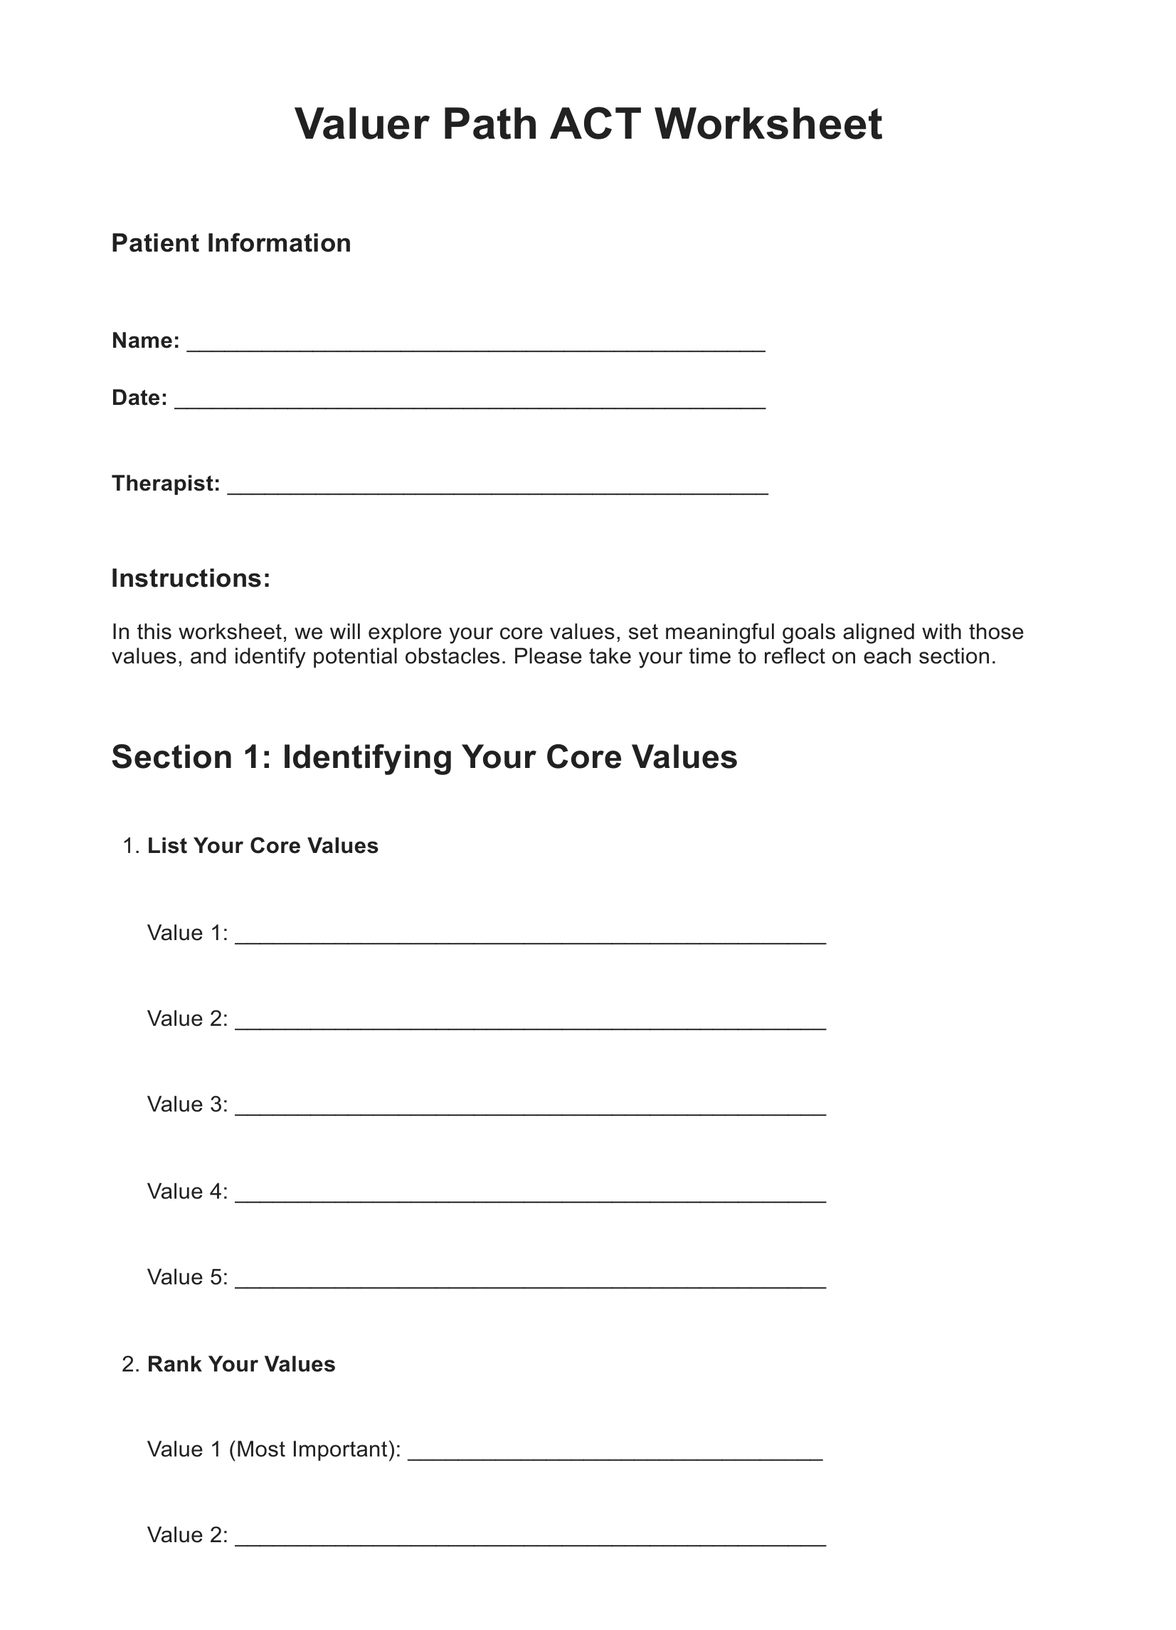 Valuer Path ACT Worksheet PDF Example